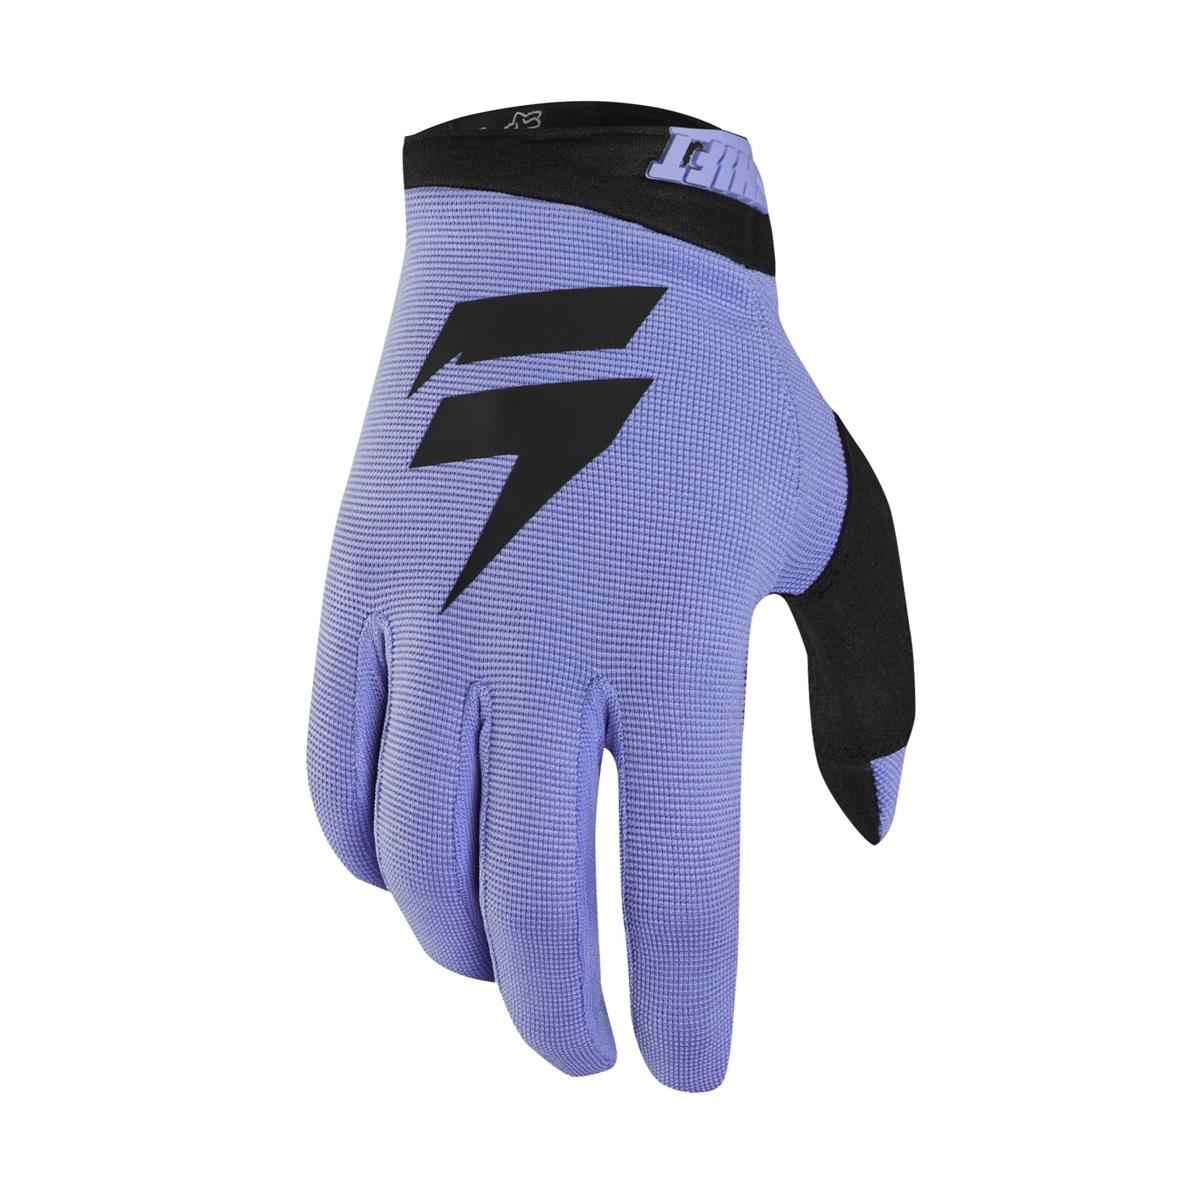 Shift Gloves Whit3 Label Air Purple